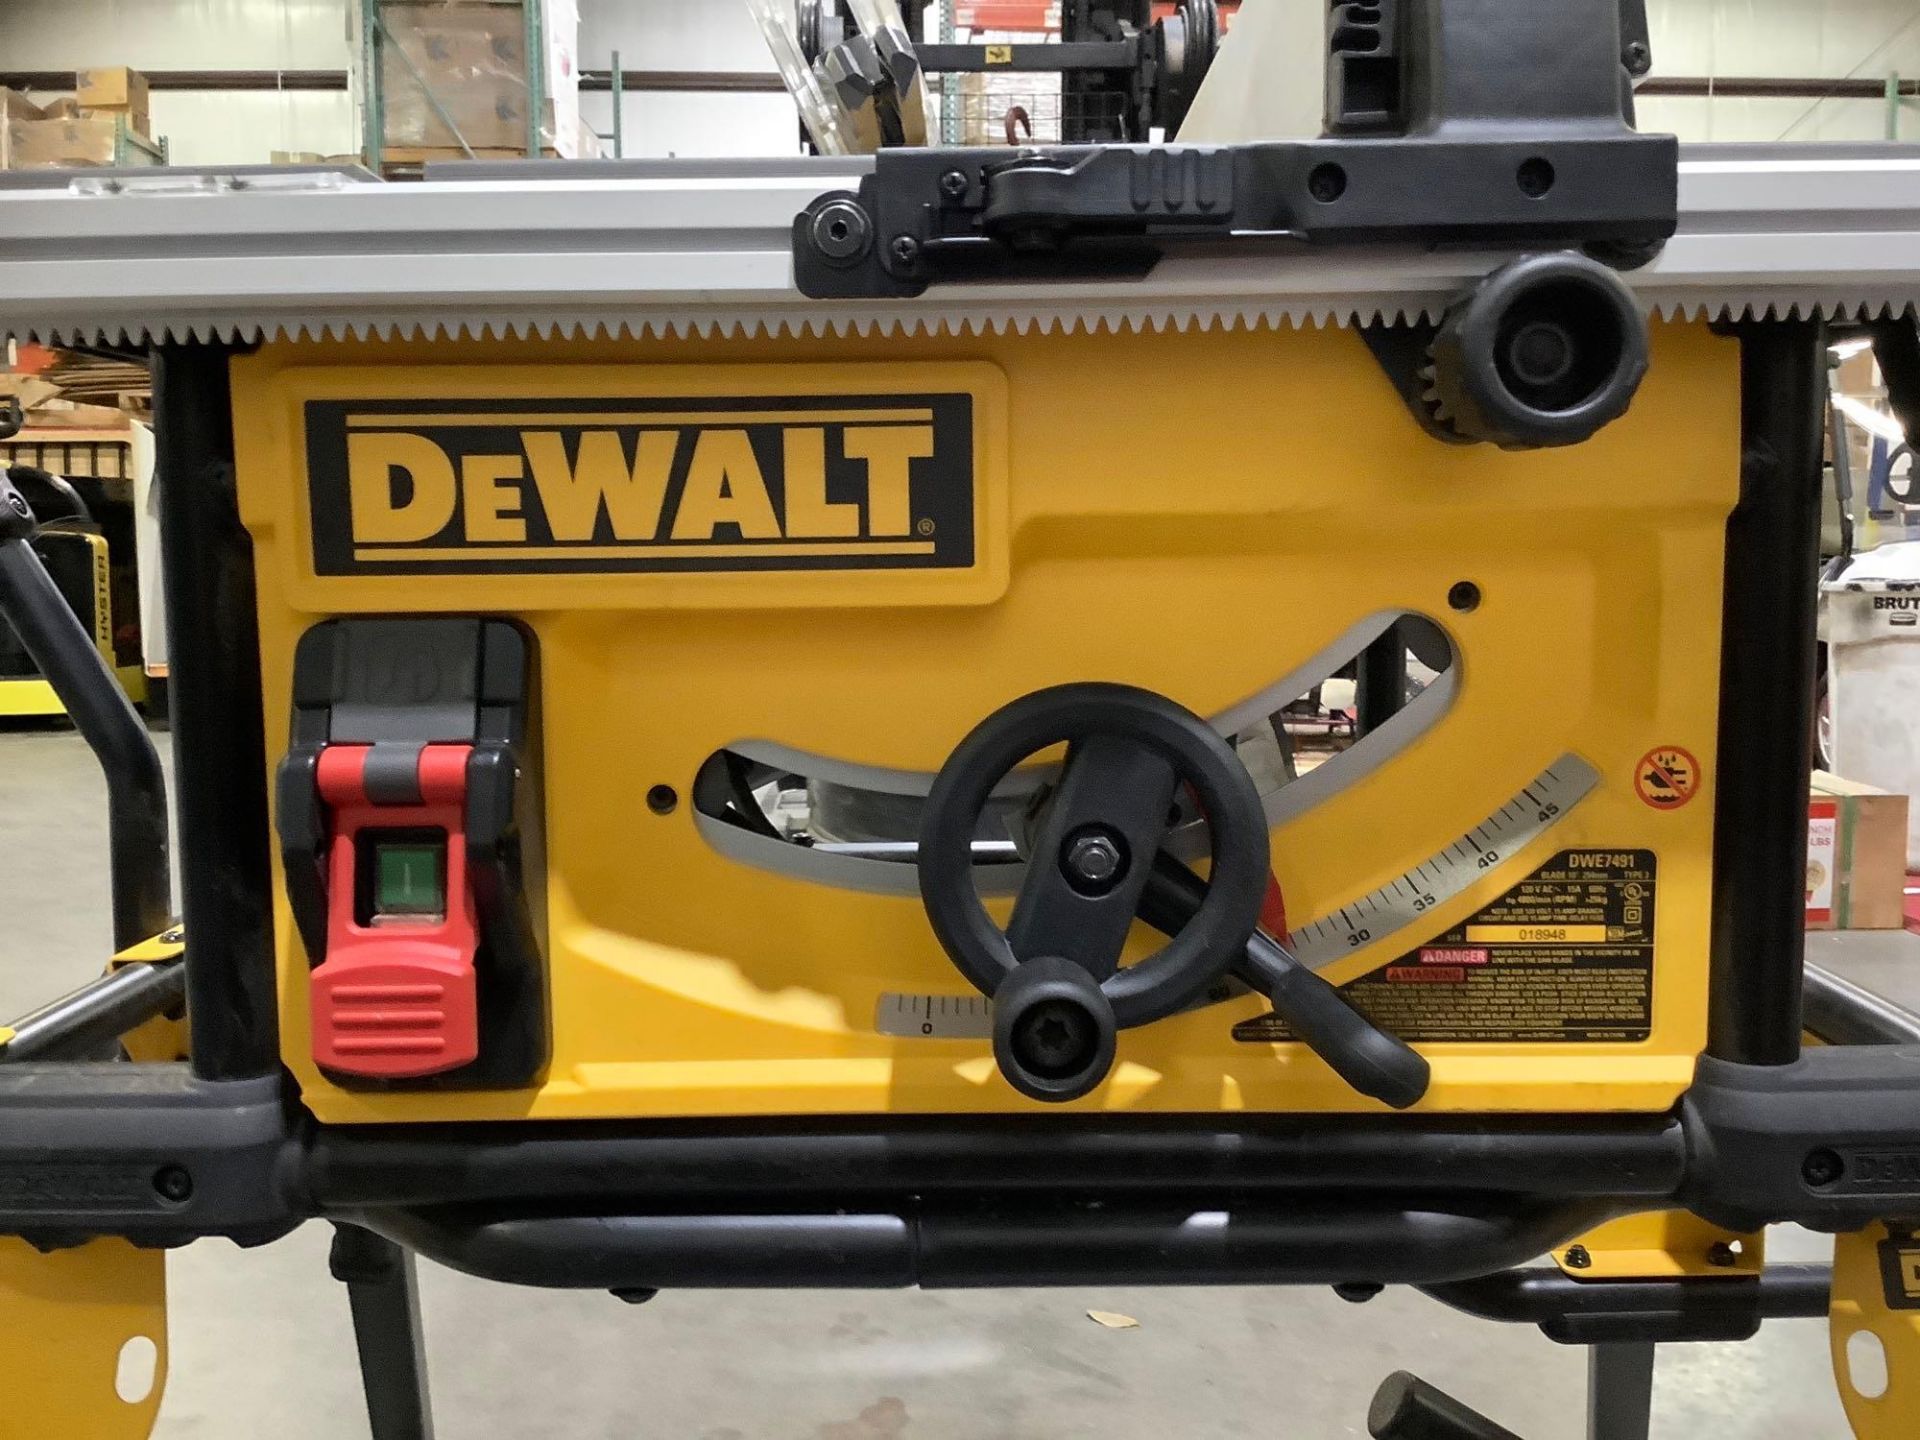 DEWALT PORTABLE TABLE SAW TYPE 3 MODEL DWE7491, ELECTRIC, APPROX BLADE 10”, APPROX 4800 RPM, RUNS AN - Image 10 of 12